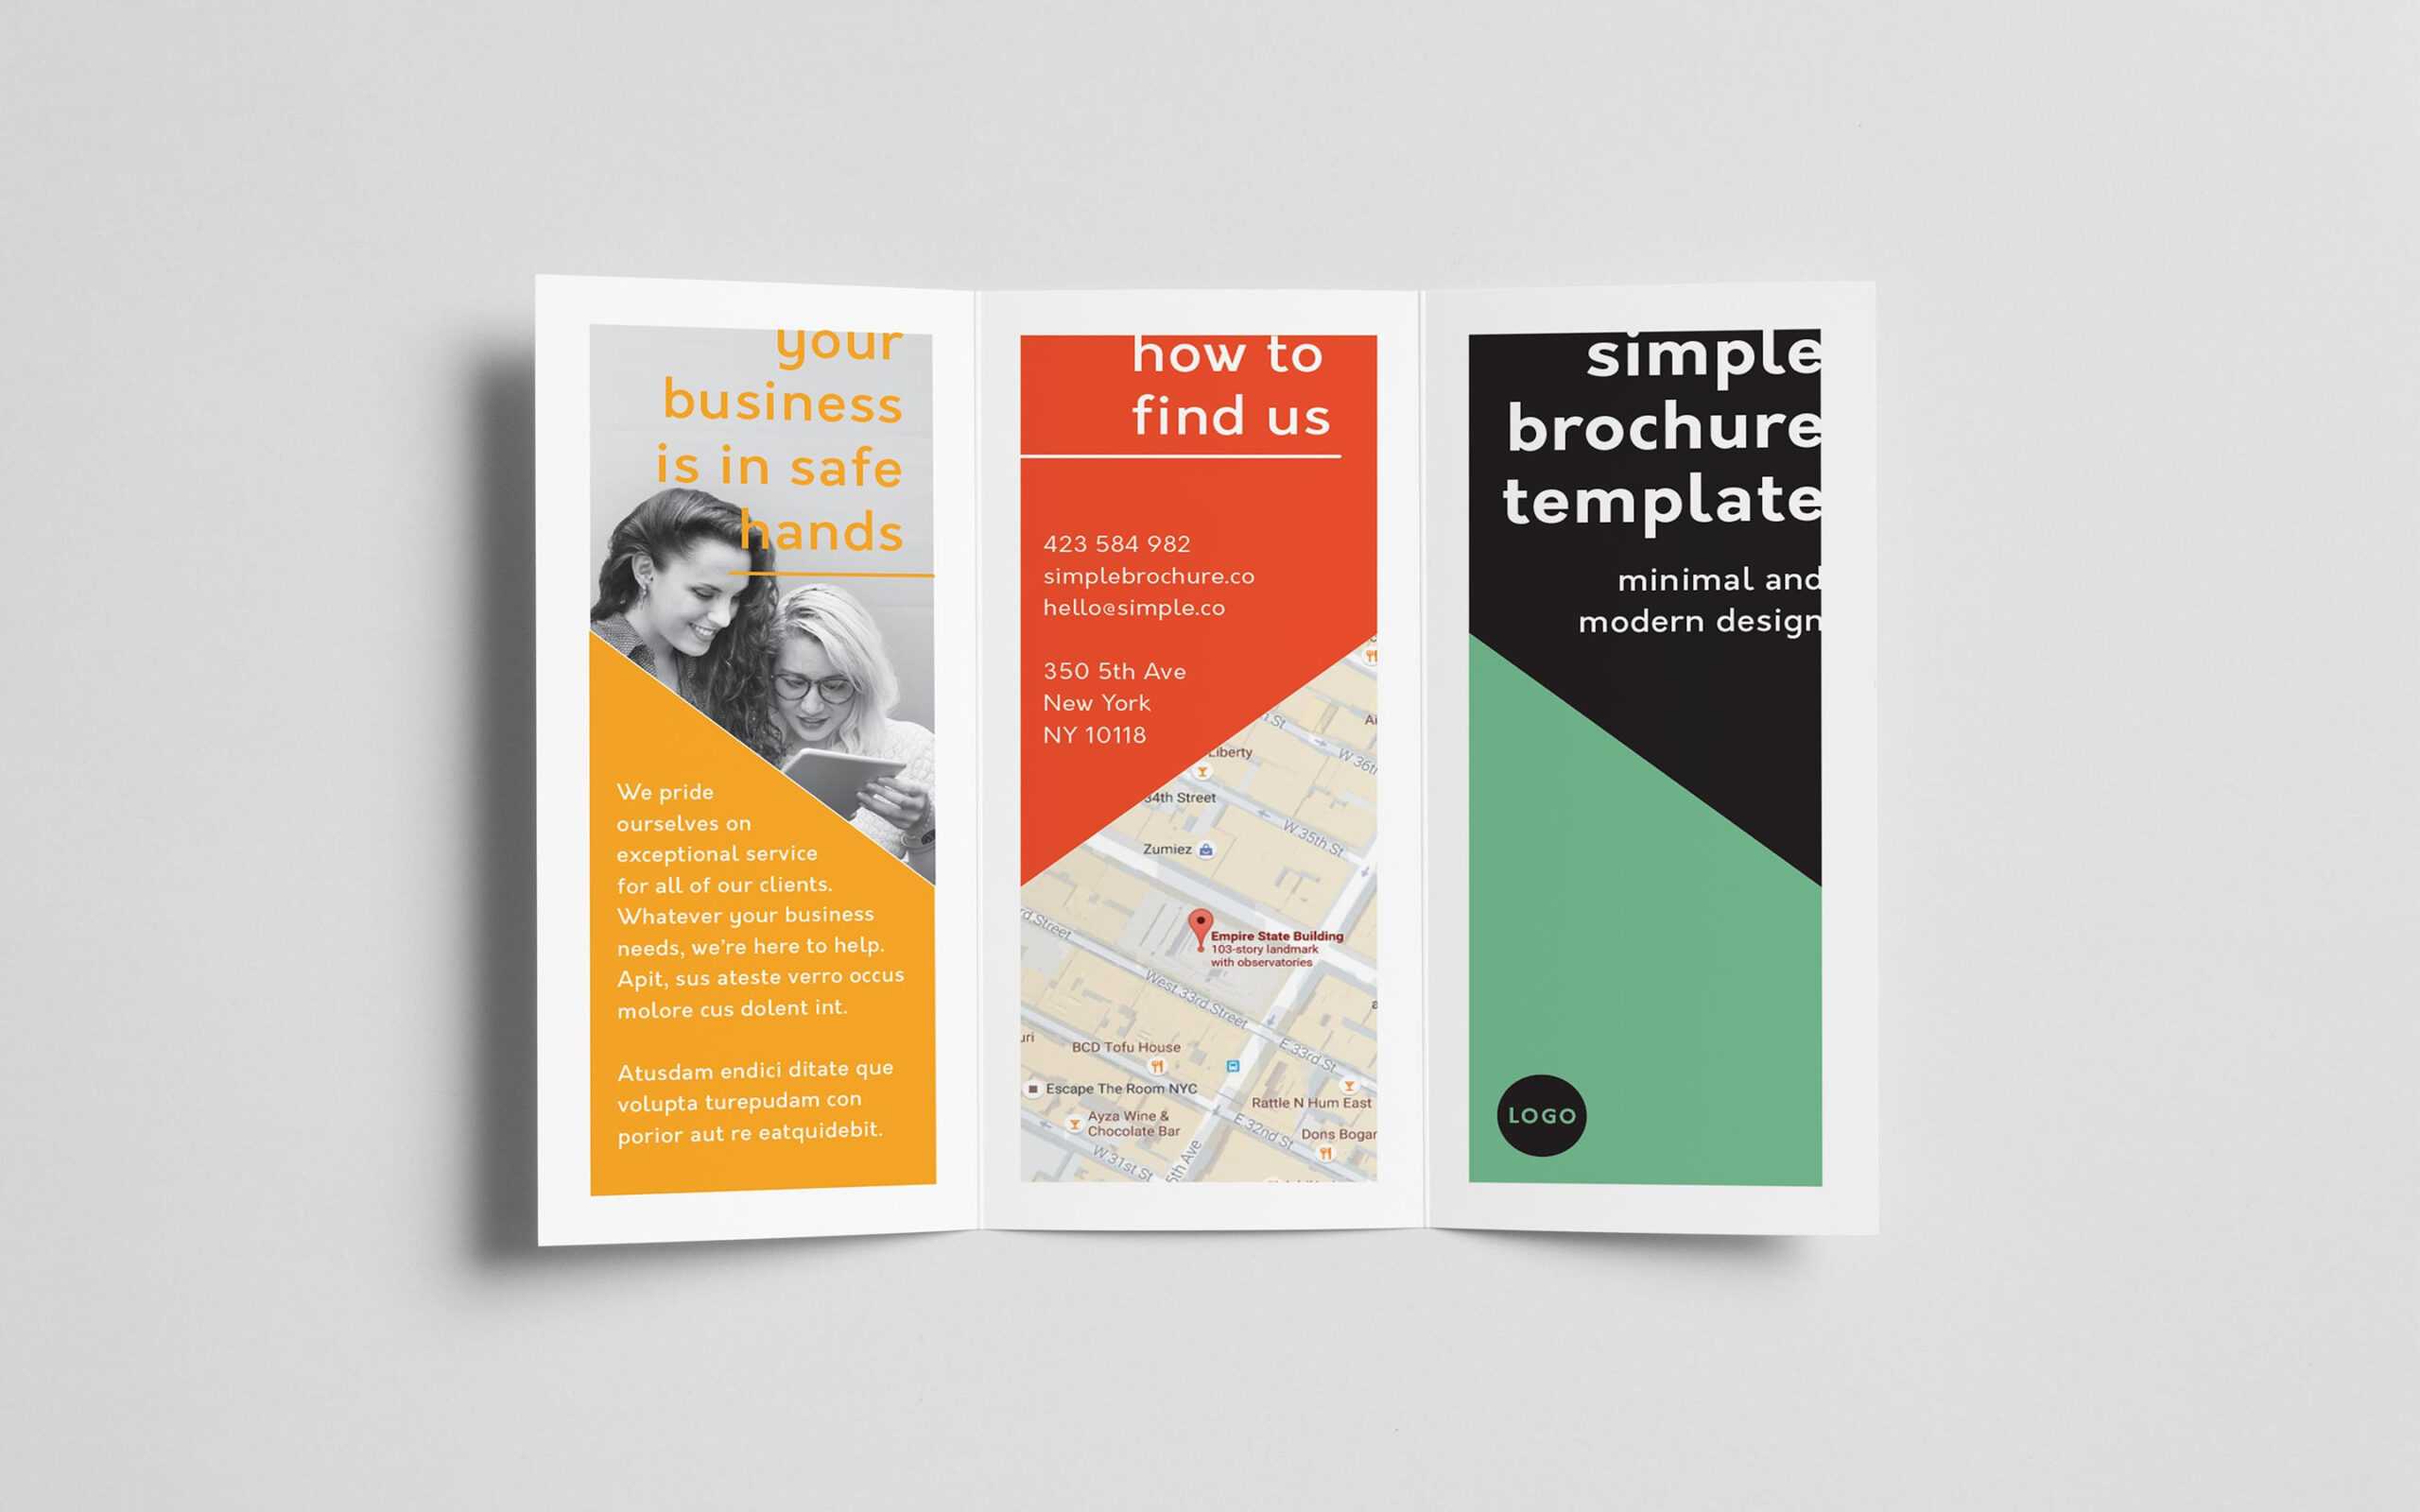 How To Create A Trifold Brochure In Adobe Indesign Regarding Adobe Indesign Tri Fold Brochure Template